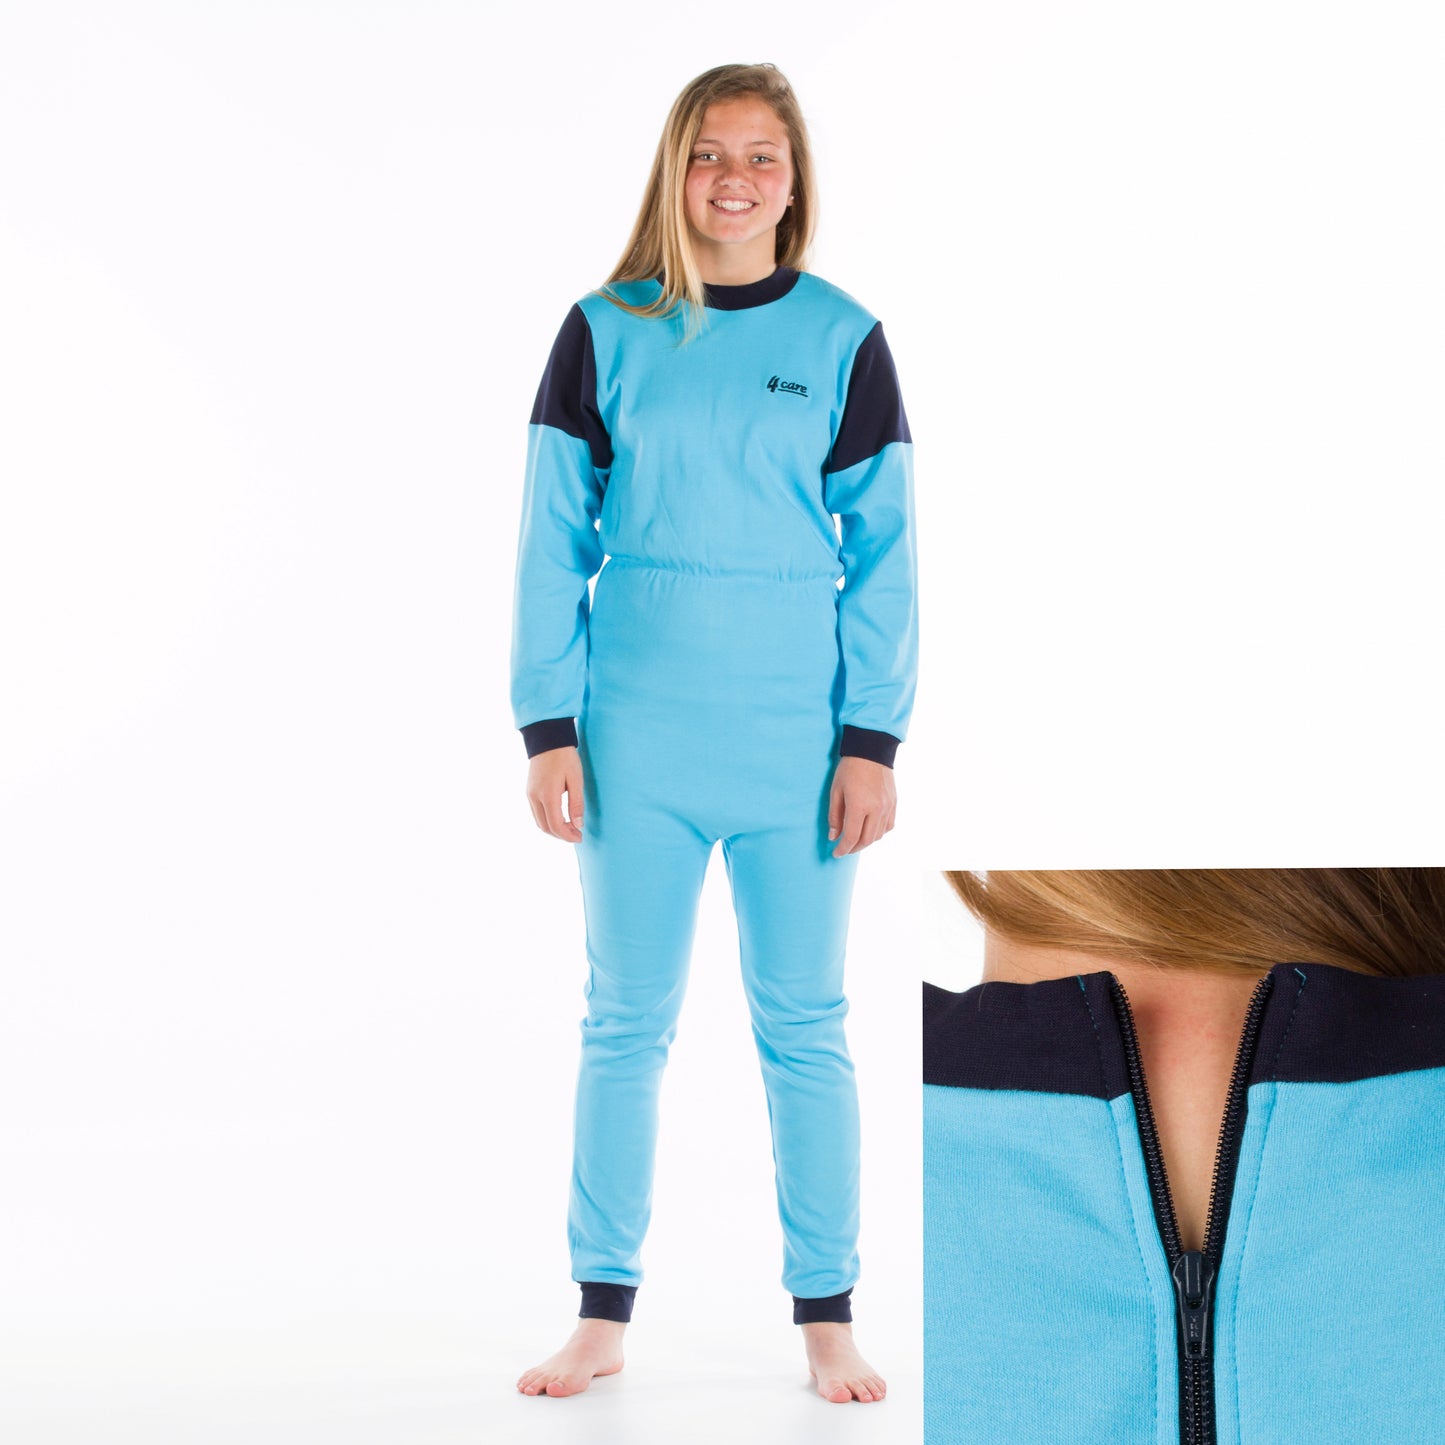 Children's All-in-One Jumpsuit With a Zip Up The Back (4030)